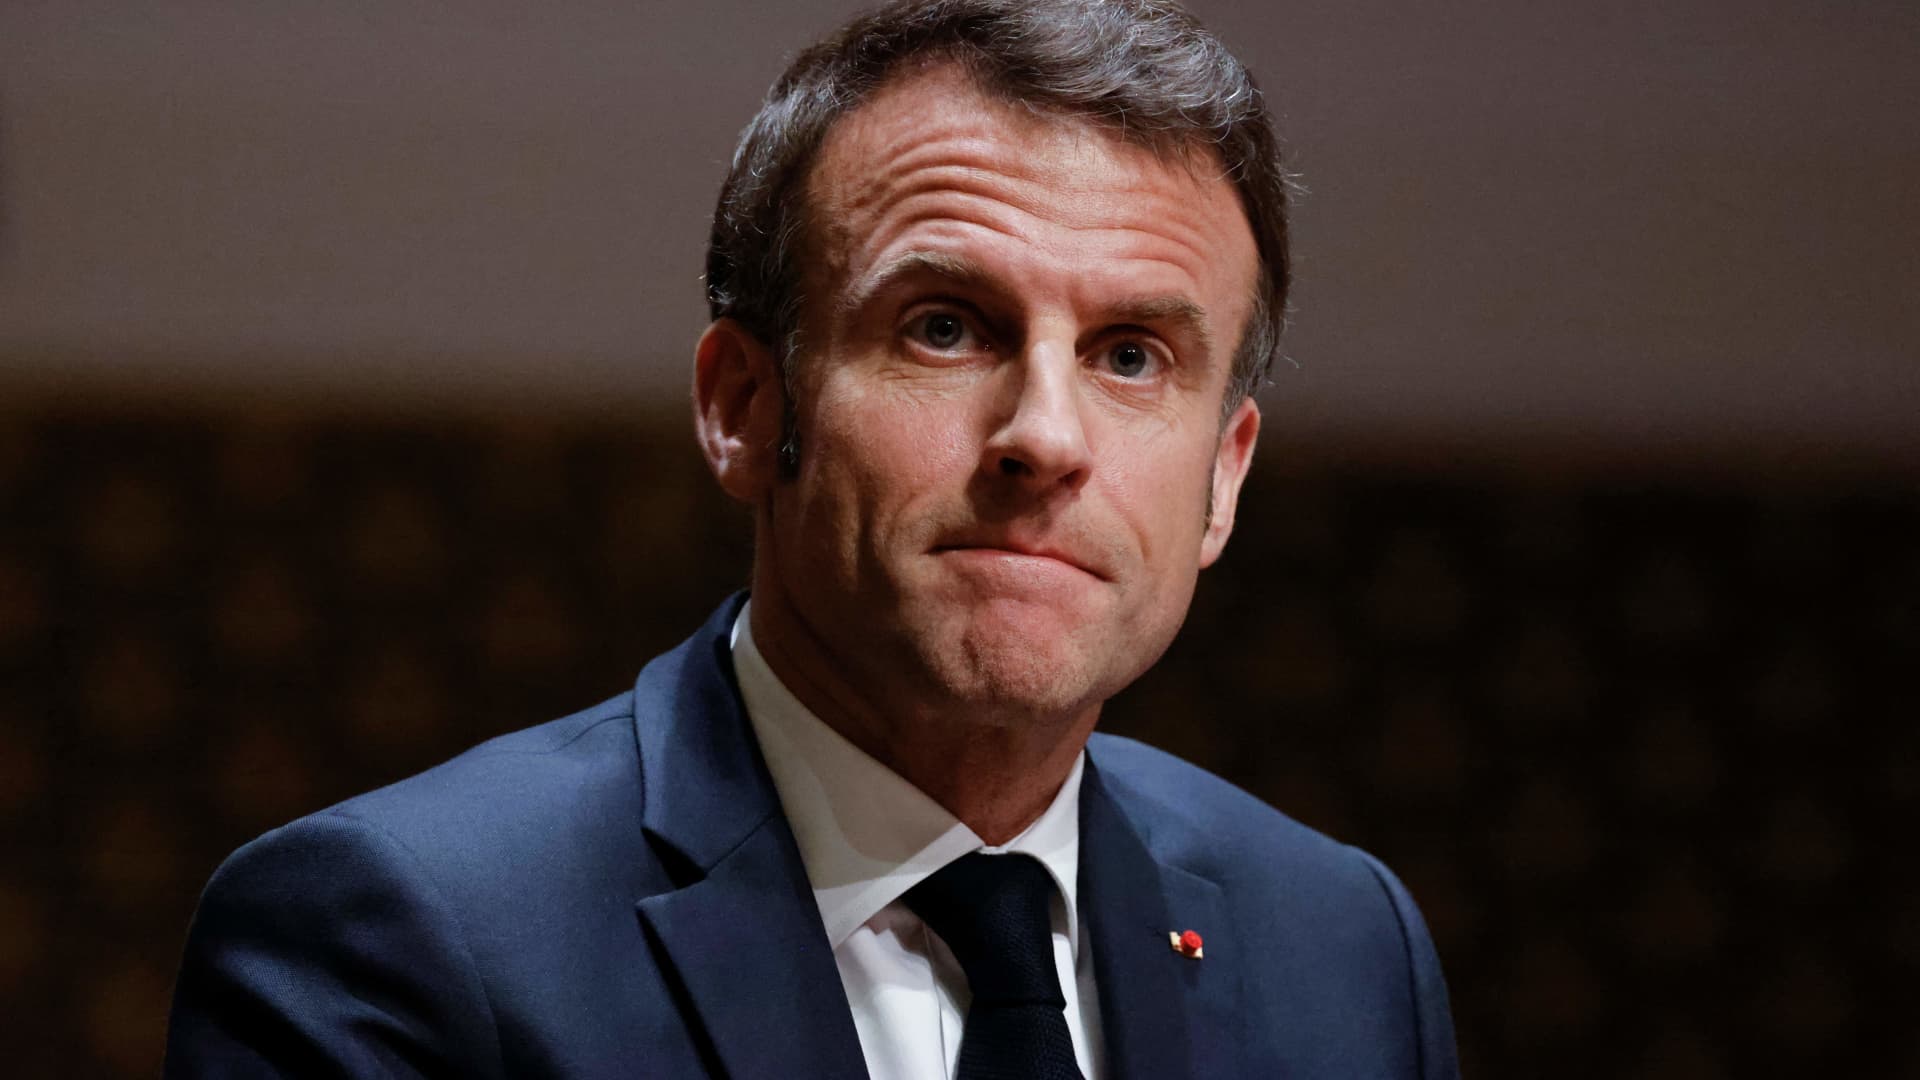 French President Emmanuel Macron looks on after delivering a speech to the Nexus Institute in the Amare theatre in The Hague on April 11, 2023 as part of a state visit to the Netherlands.